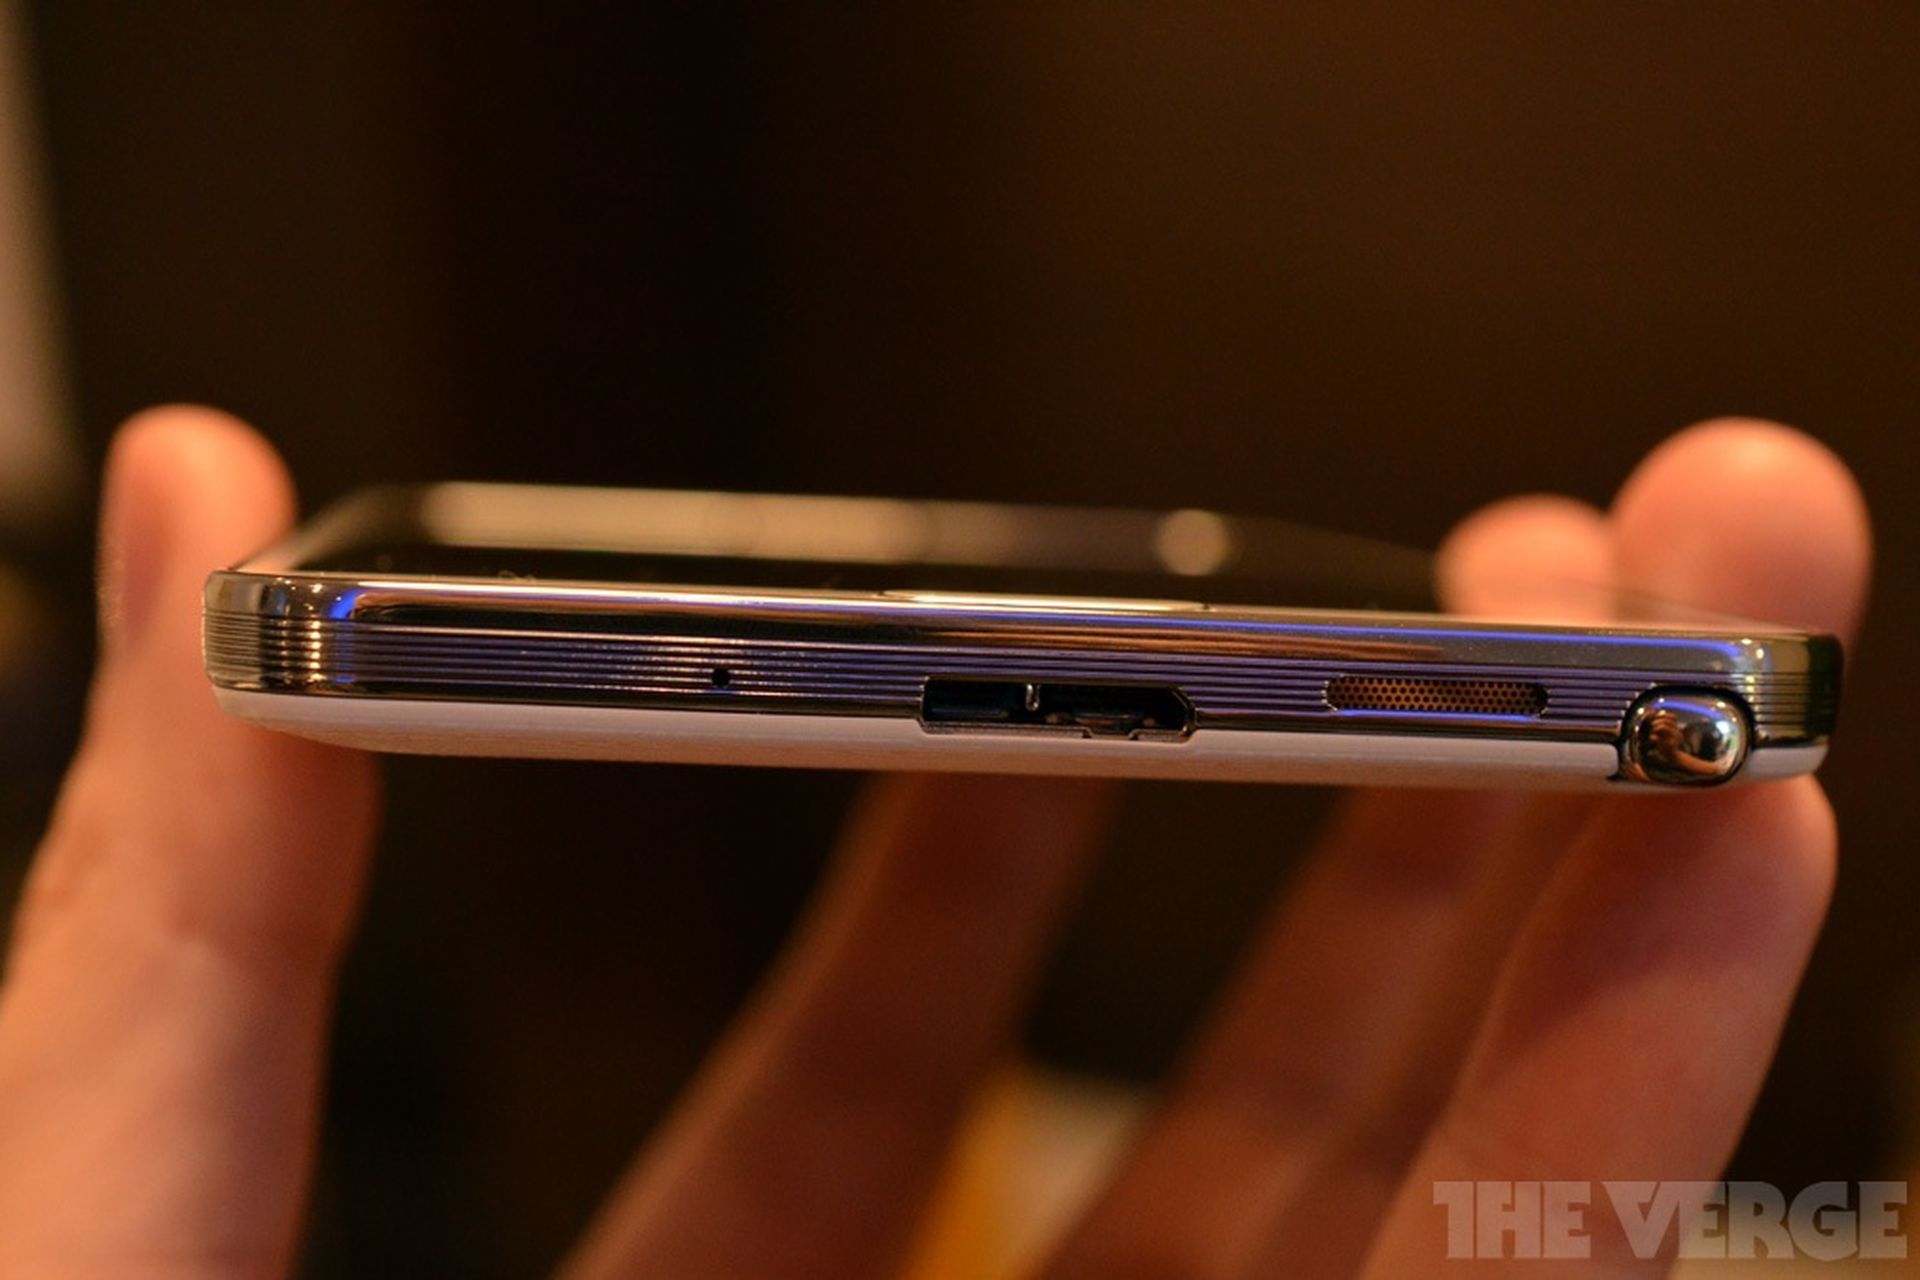 Galaxy Note 3 first phone to feature ugly new Micro USB 3 port - The Verge